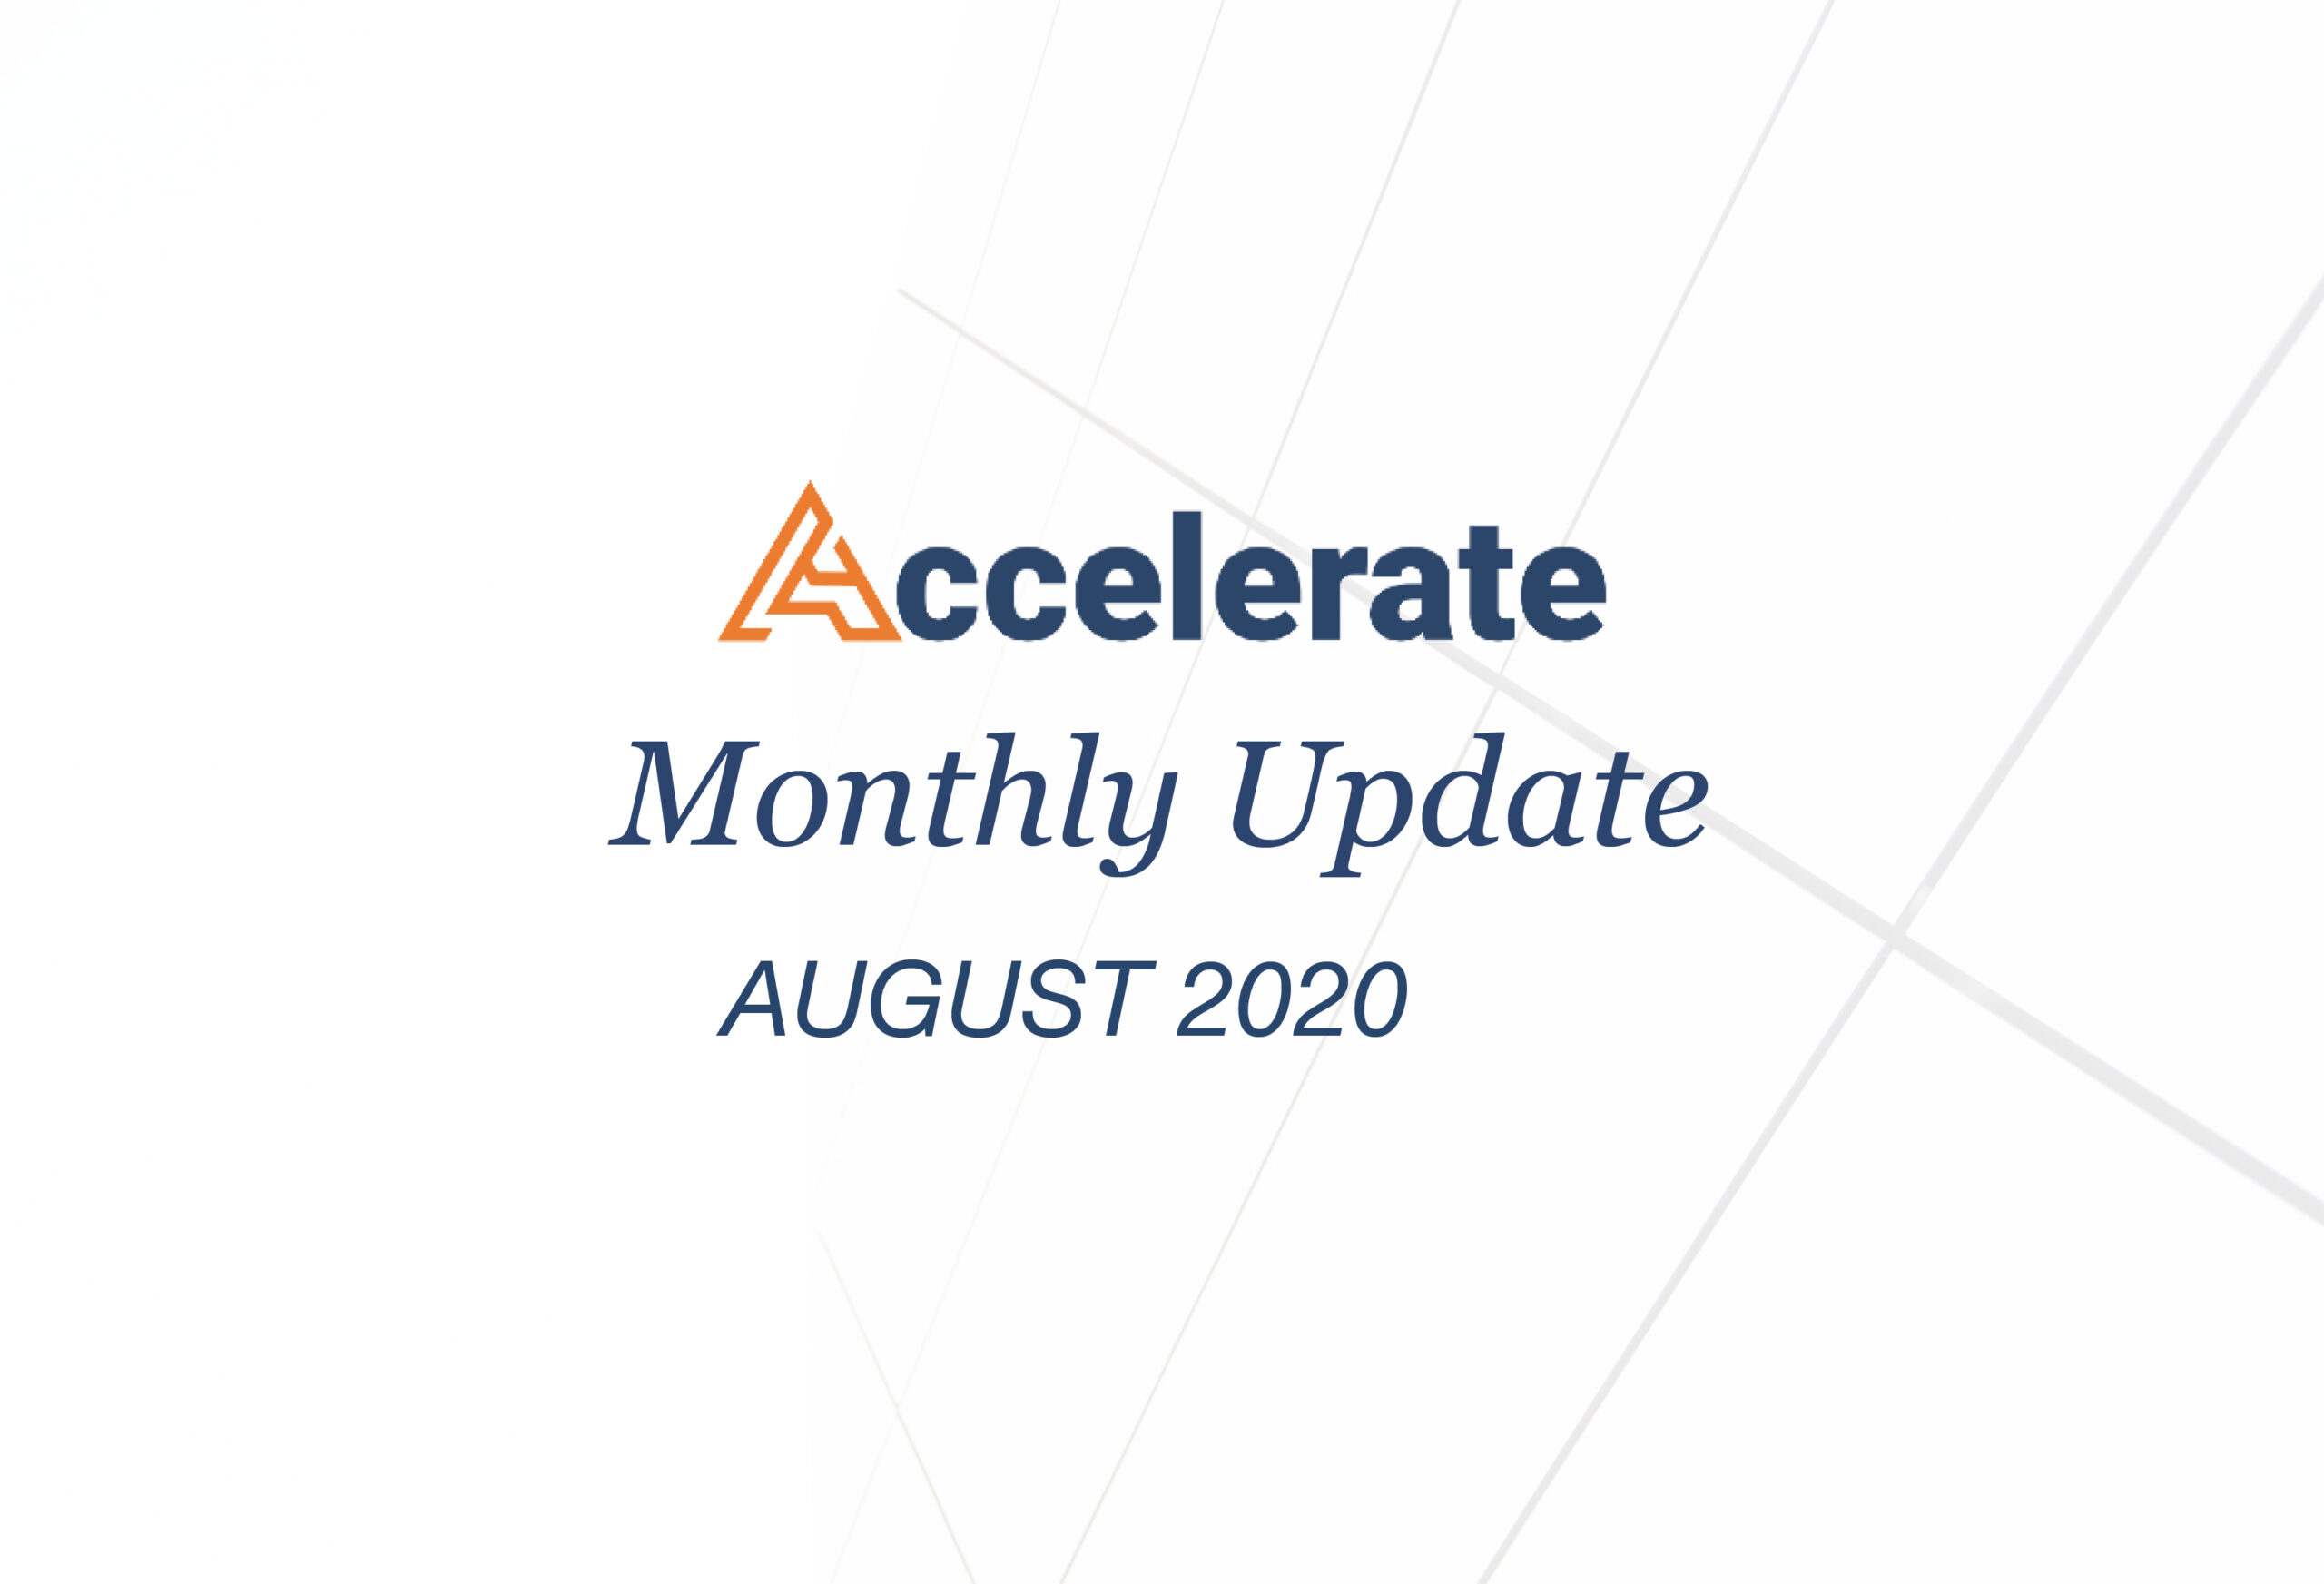 Accelerate Monthly Update – August 2020